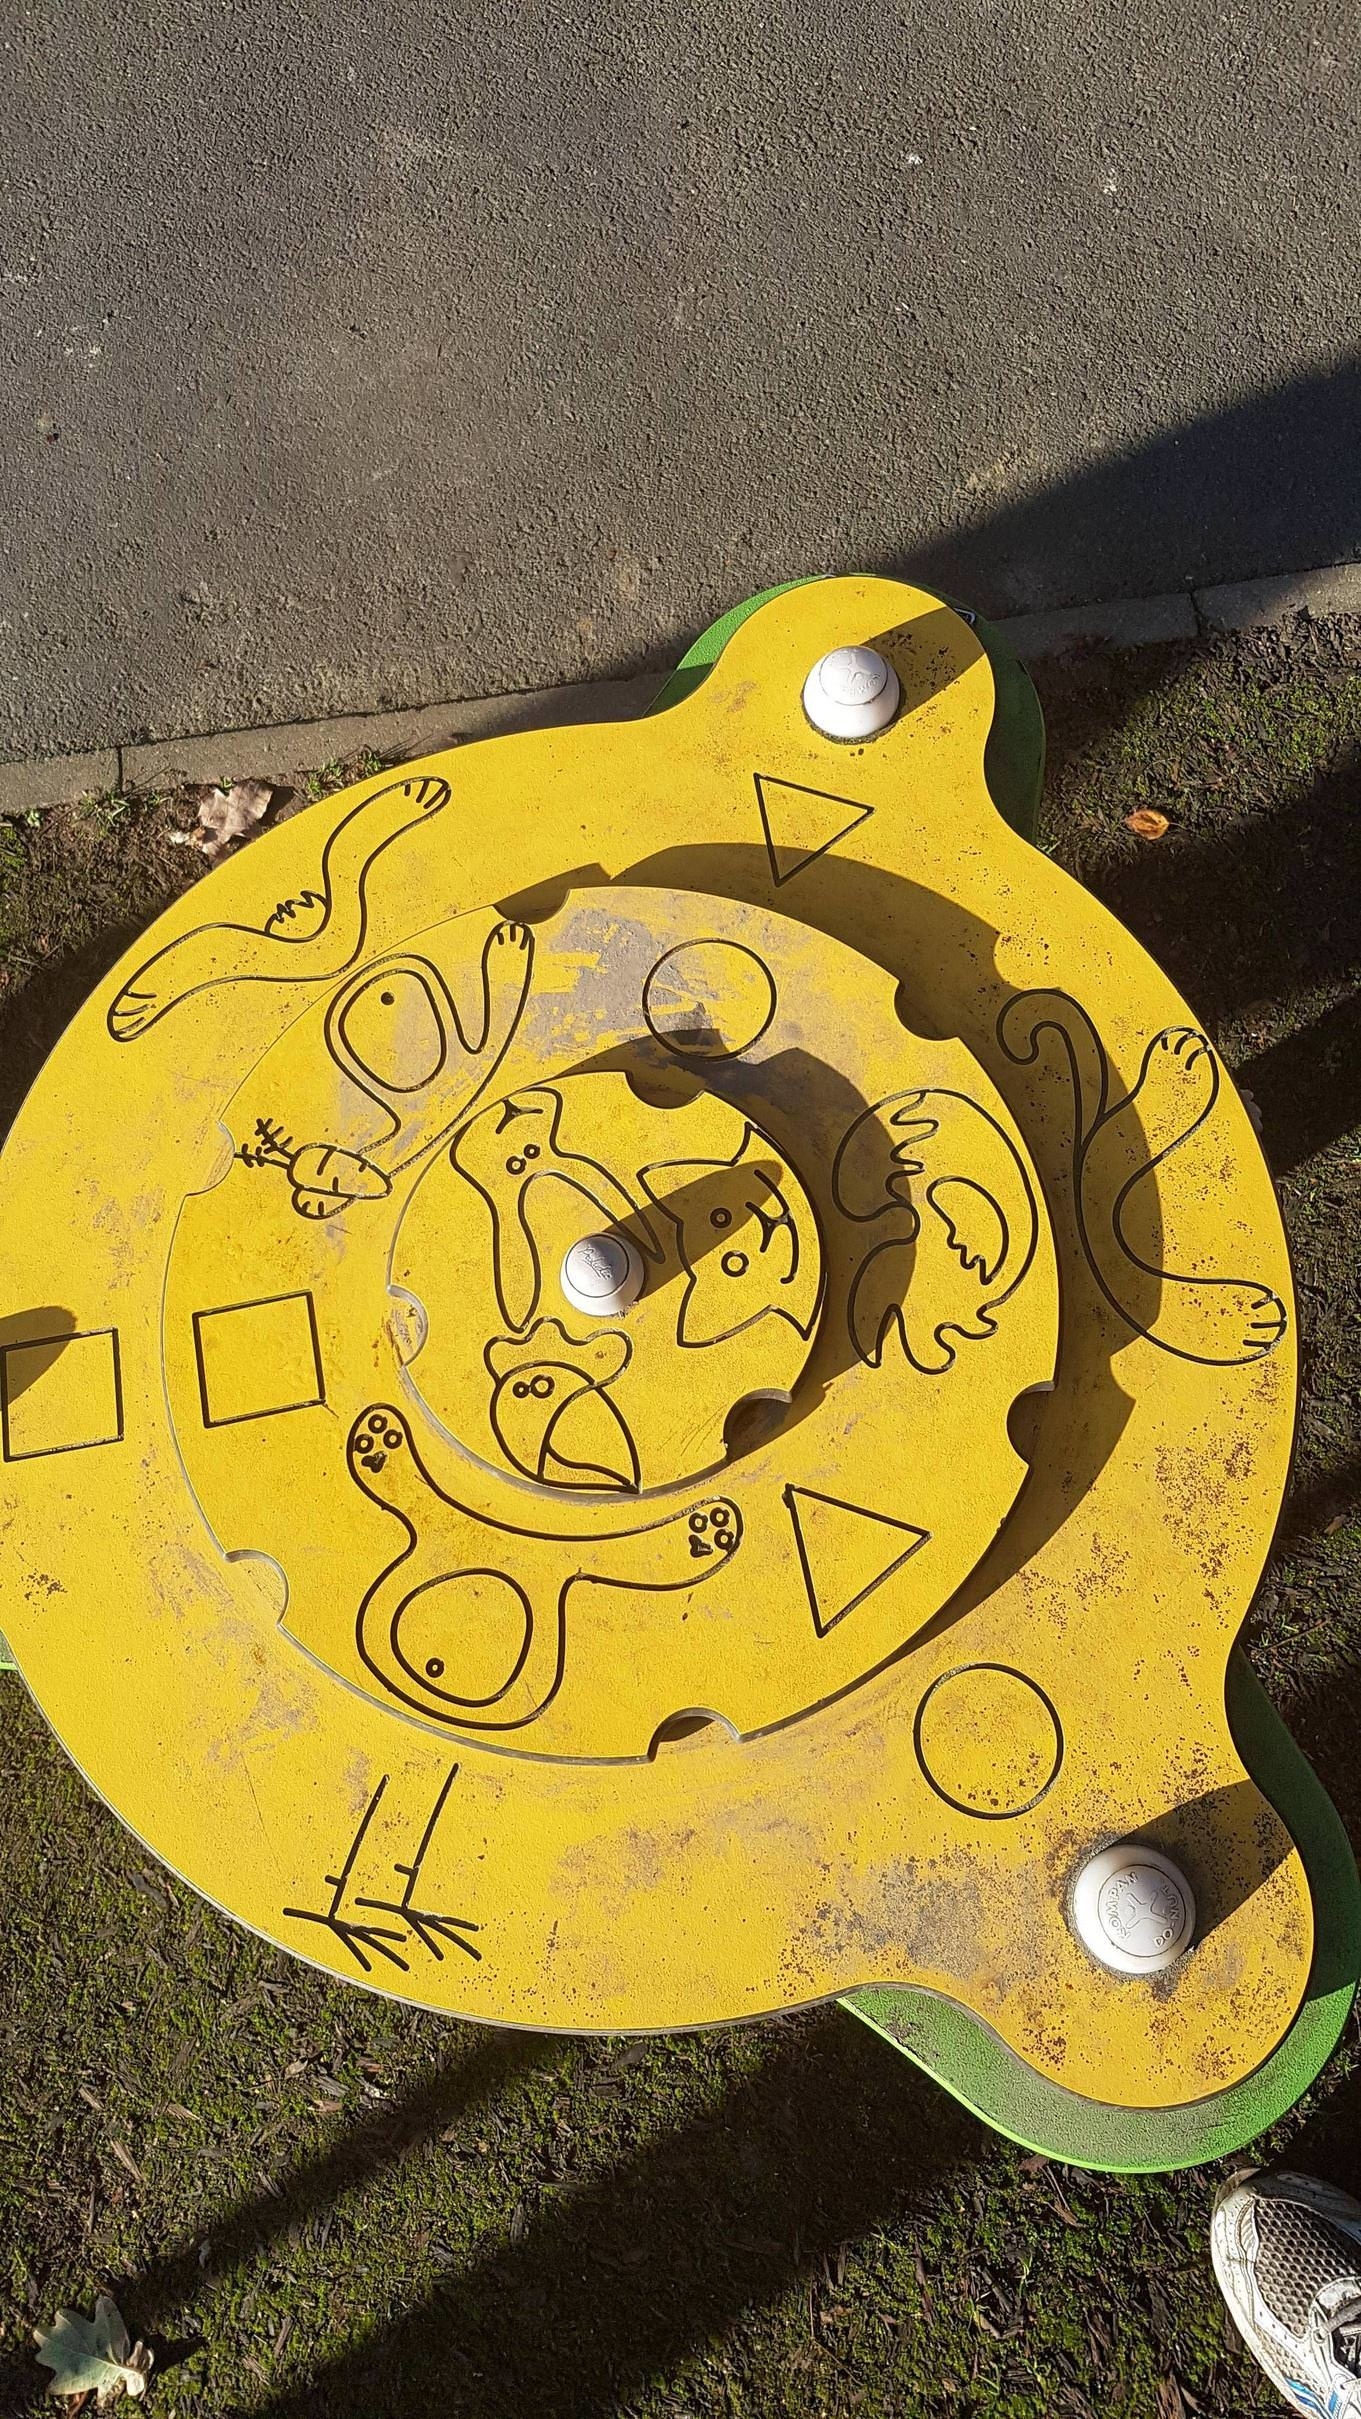 A playground puzzle